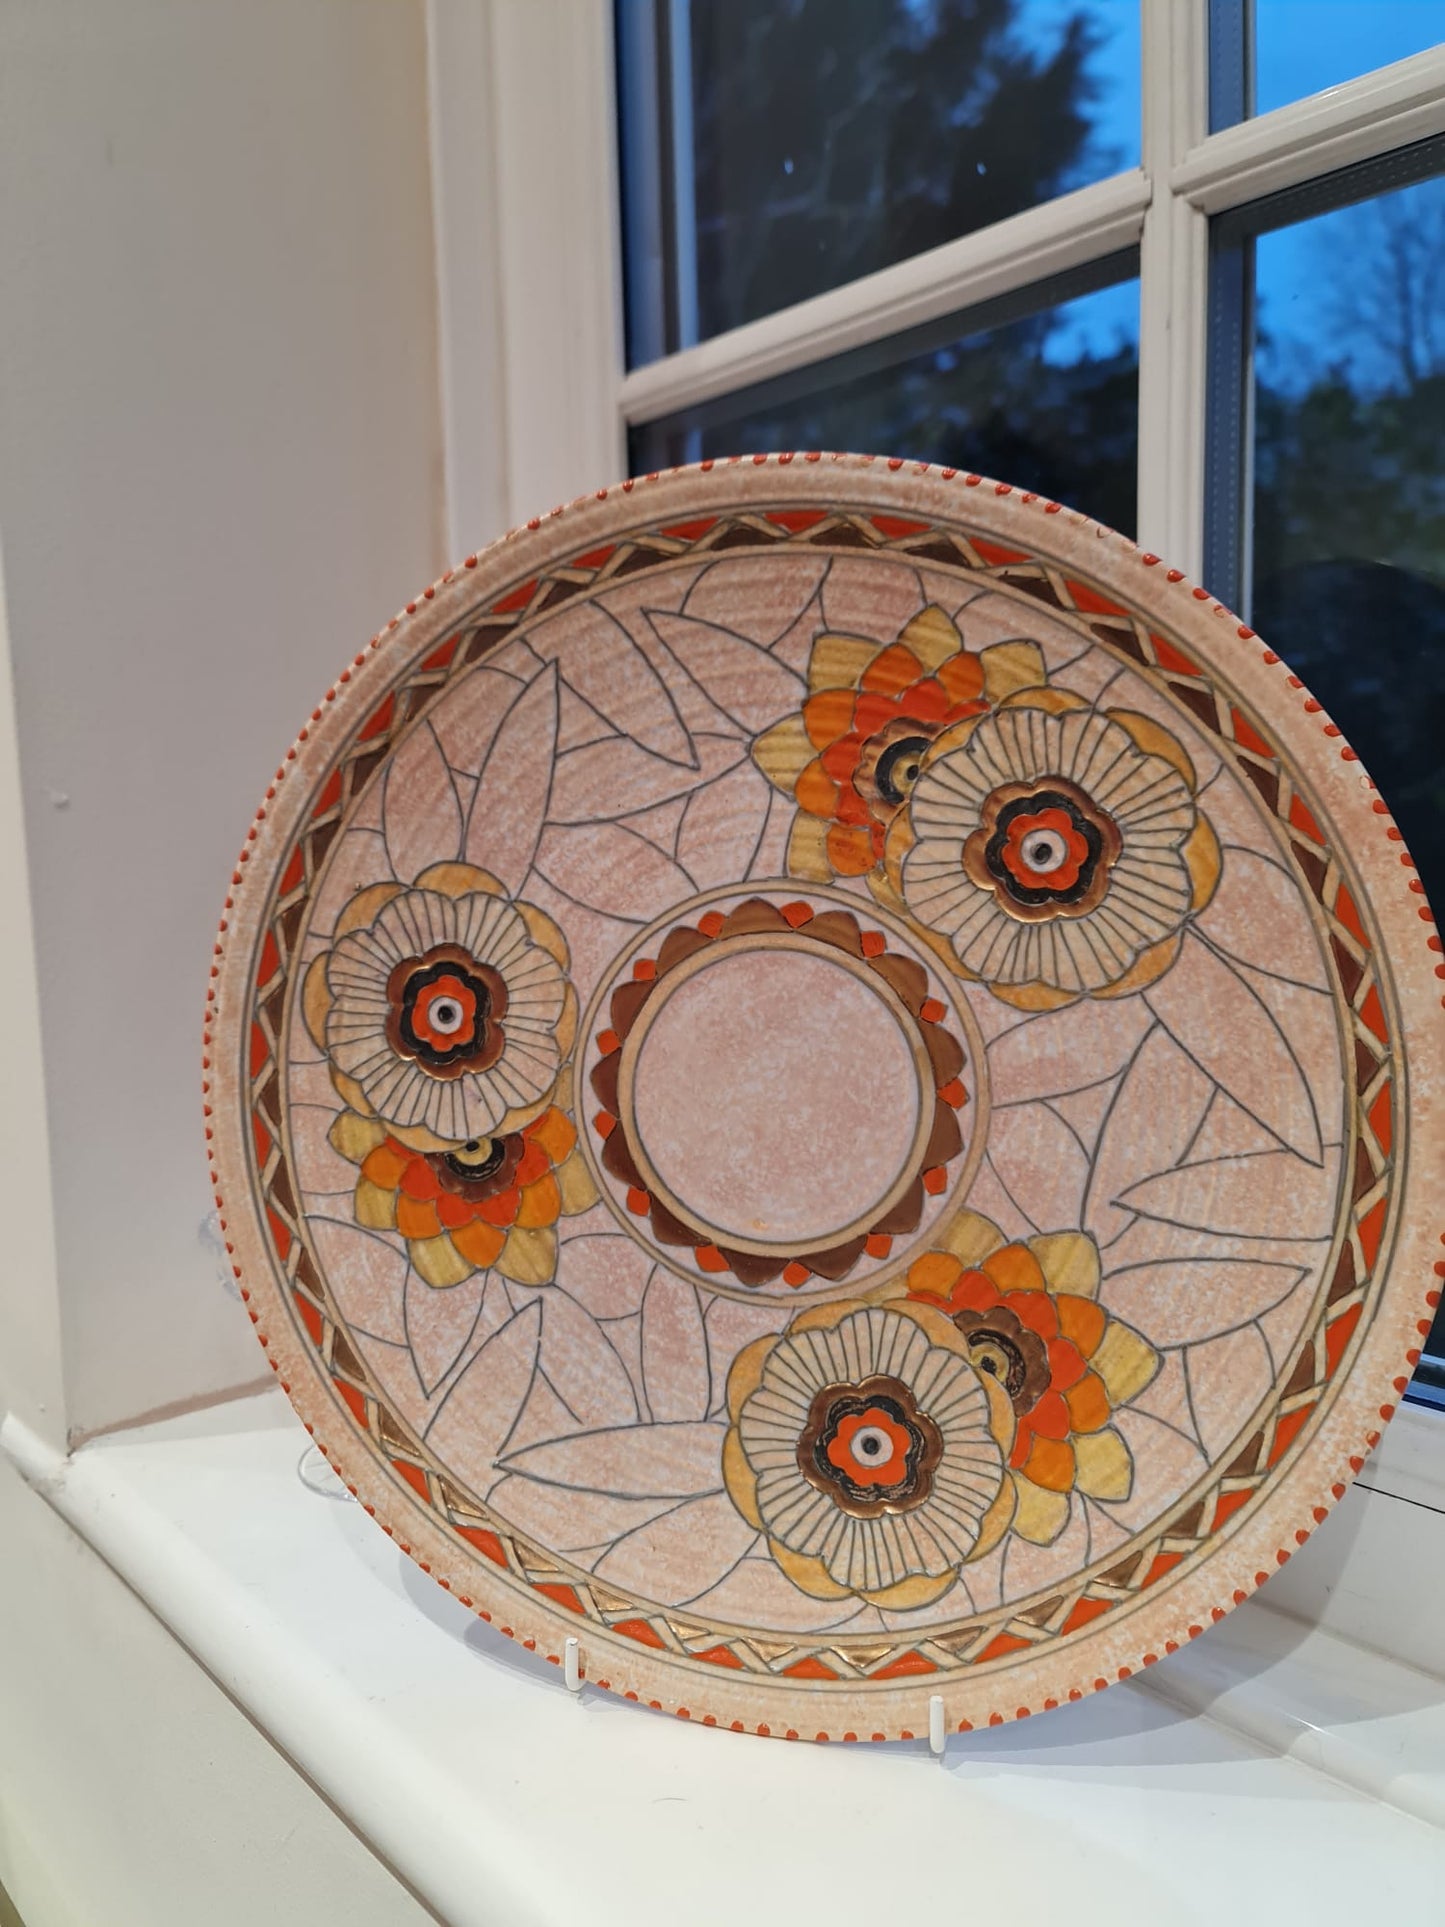 This collector plate, designed by Charlotte Rhead, features an intricate pattern of leaves and showcases the Art Deco style.